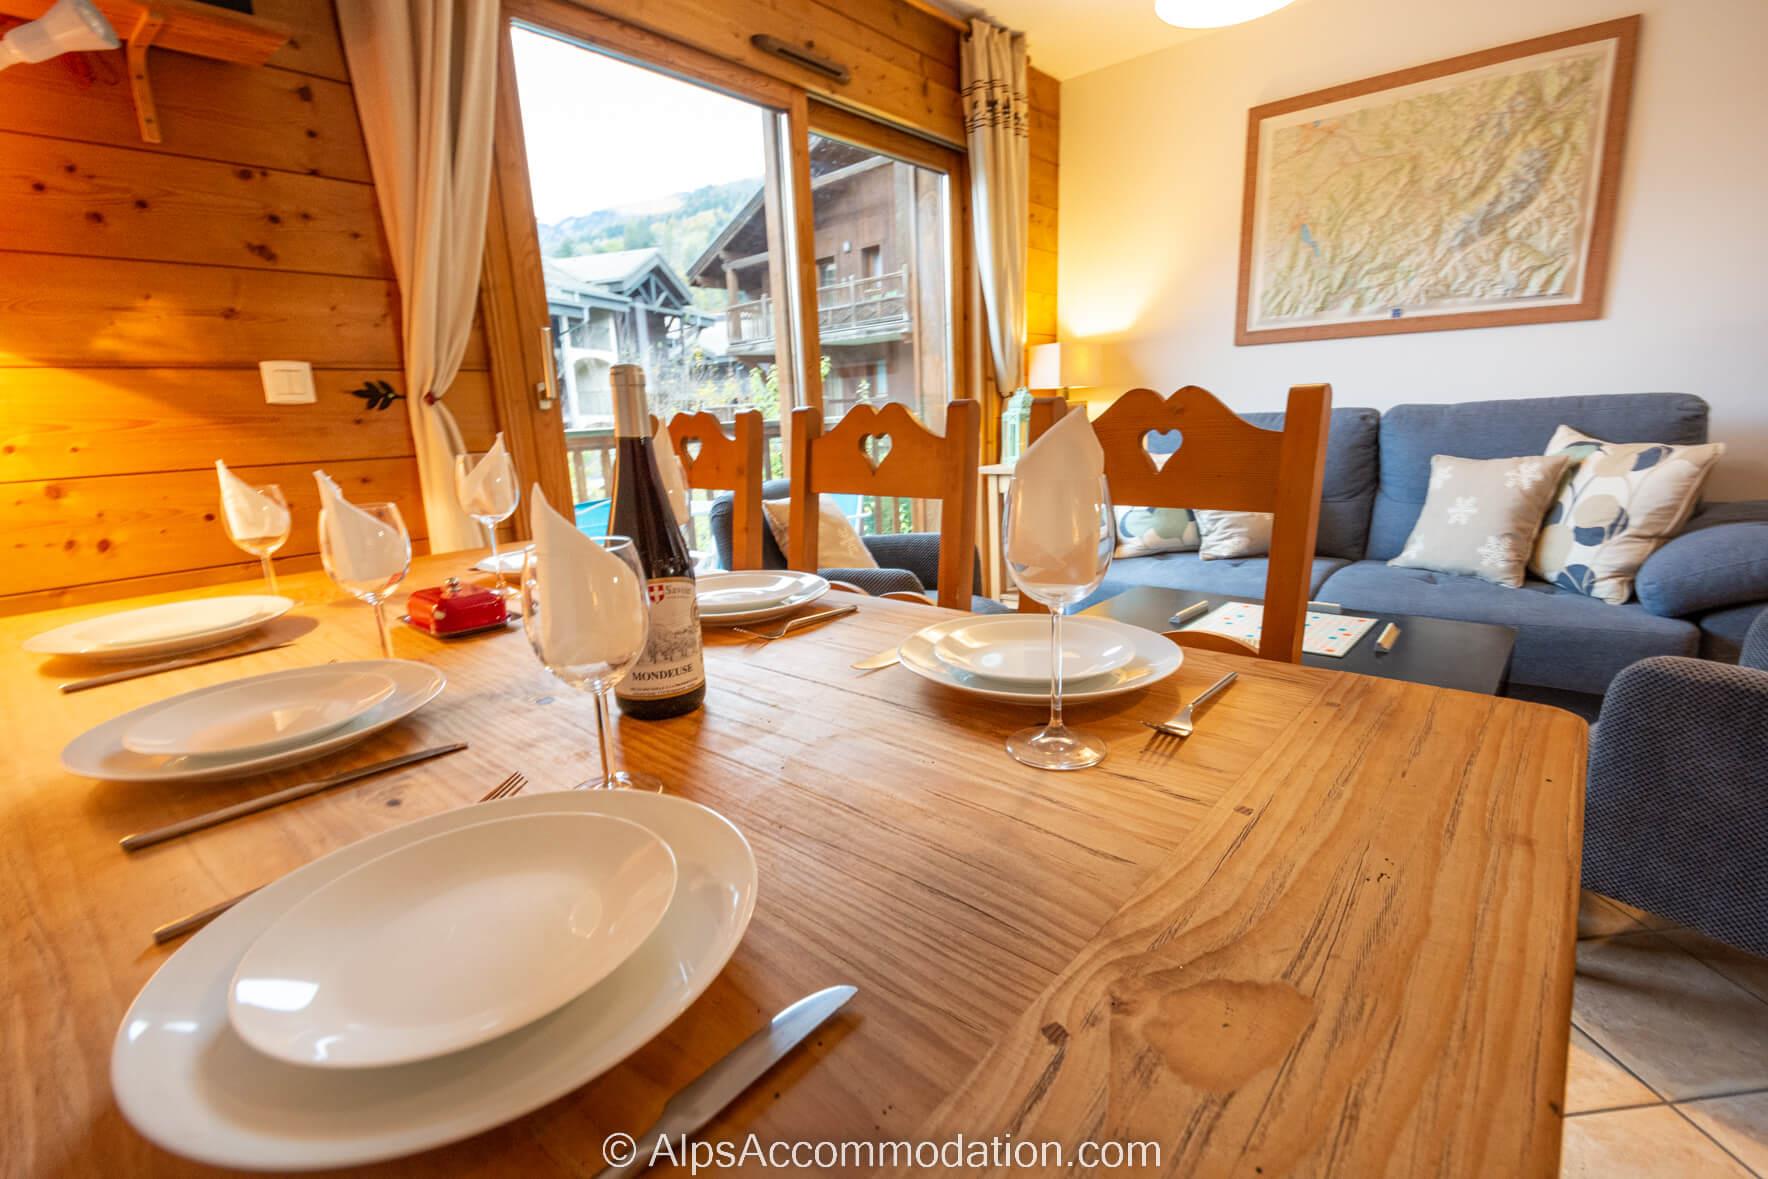 Ecrins Etoiles C15 Samoëns - Comfortable dining for up to 8 people